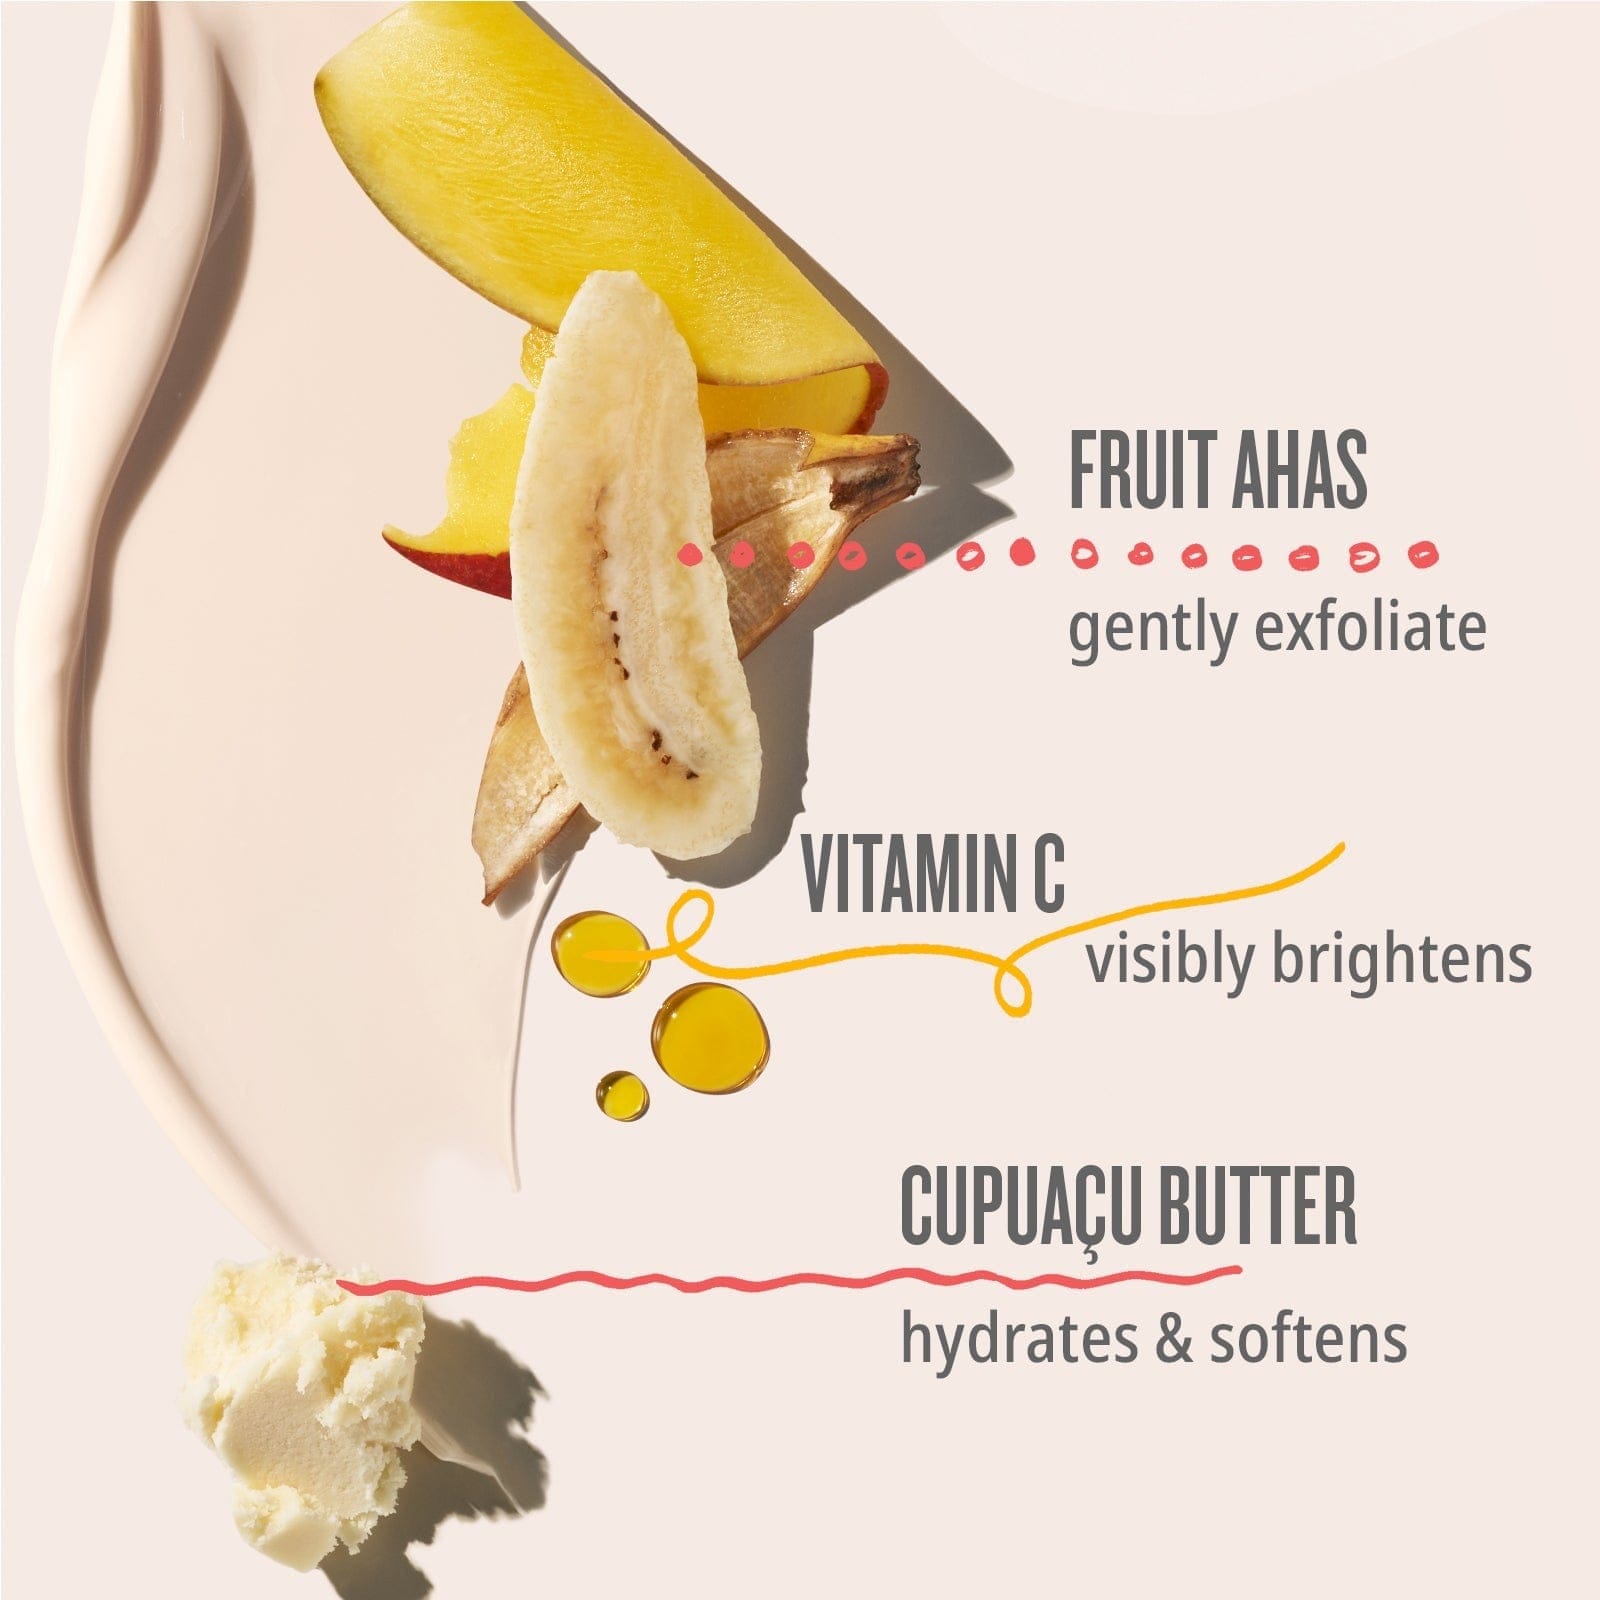 Fruit AHAs gently exfoliate, vitamin c visibly brightens, cupuacu butter hydrates &amp; softens.